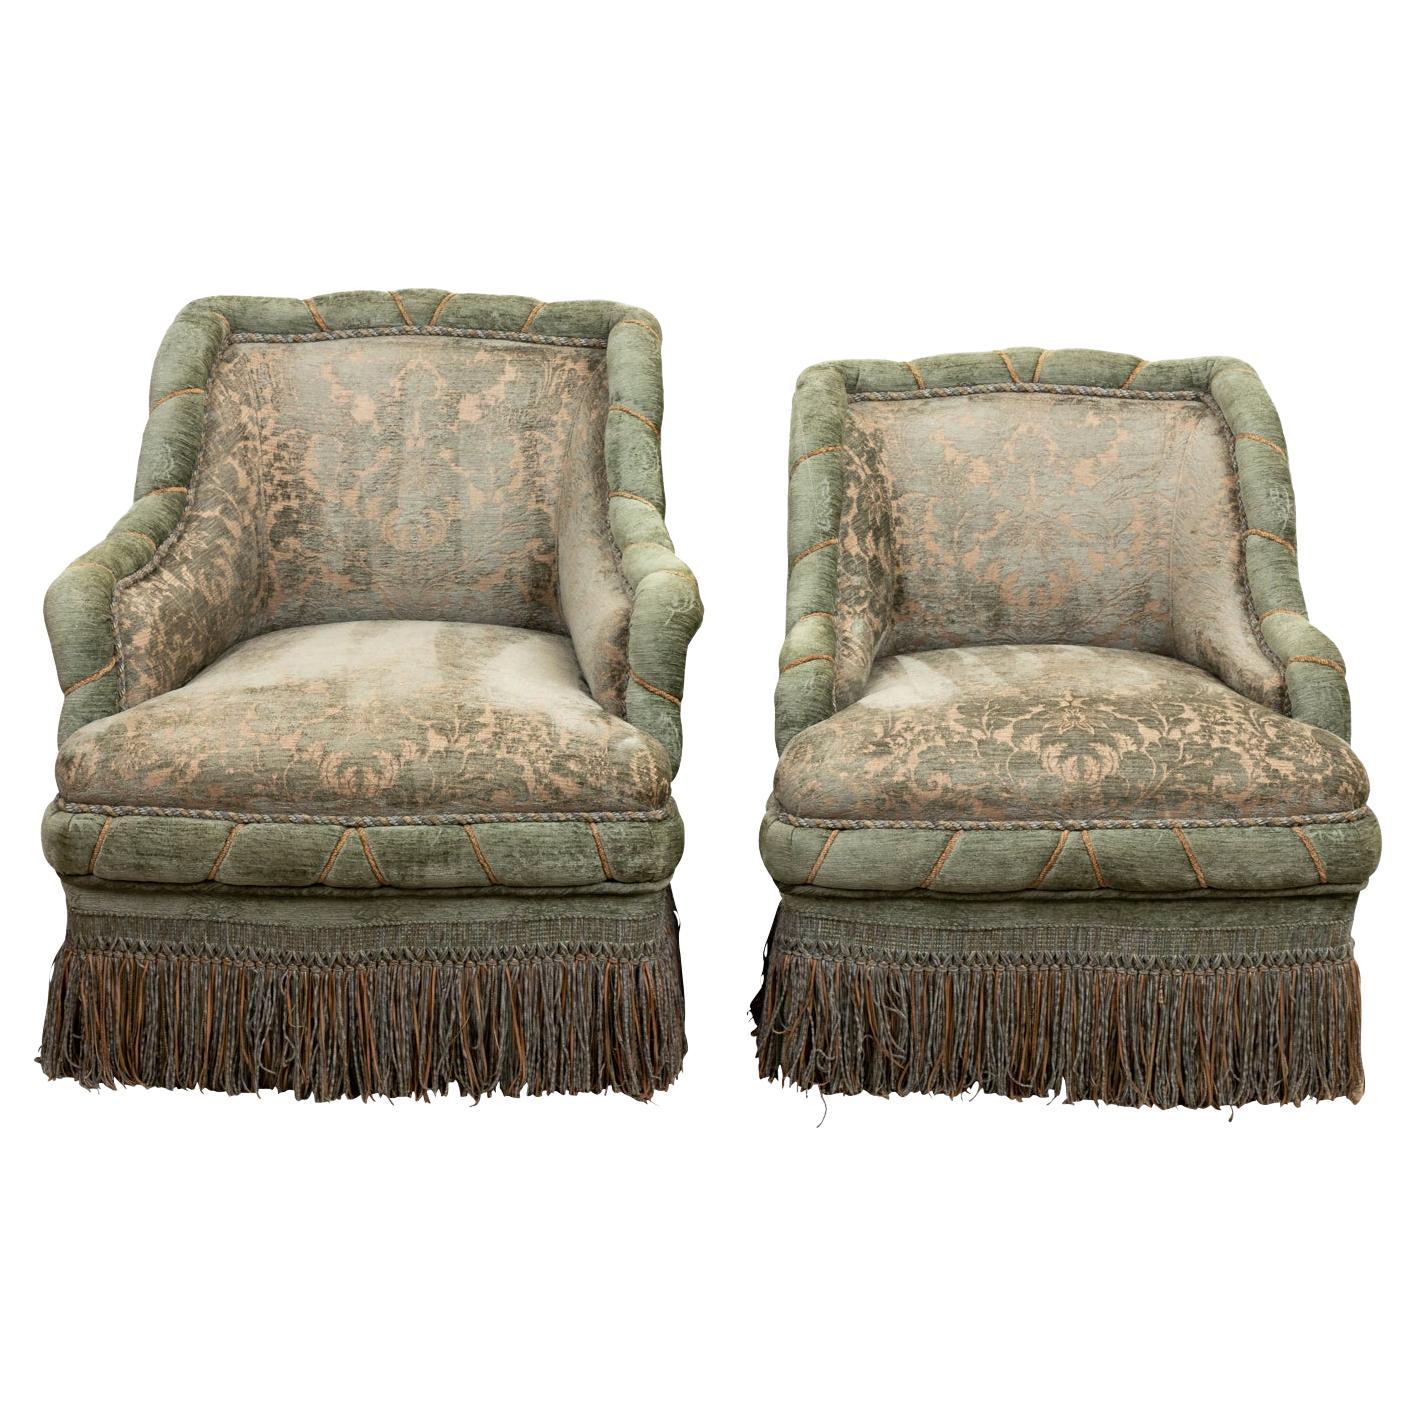 Pair Edwardian Style Upholstered Slipper Chairs